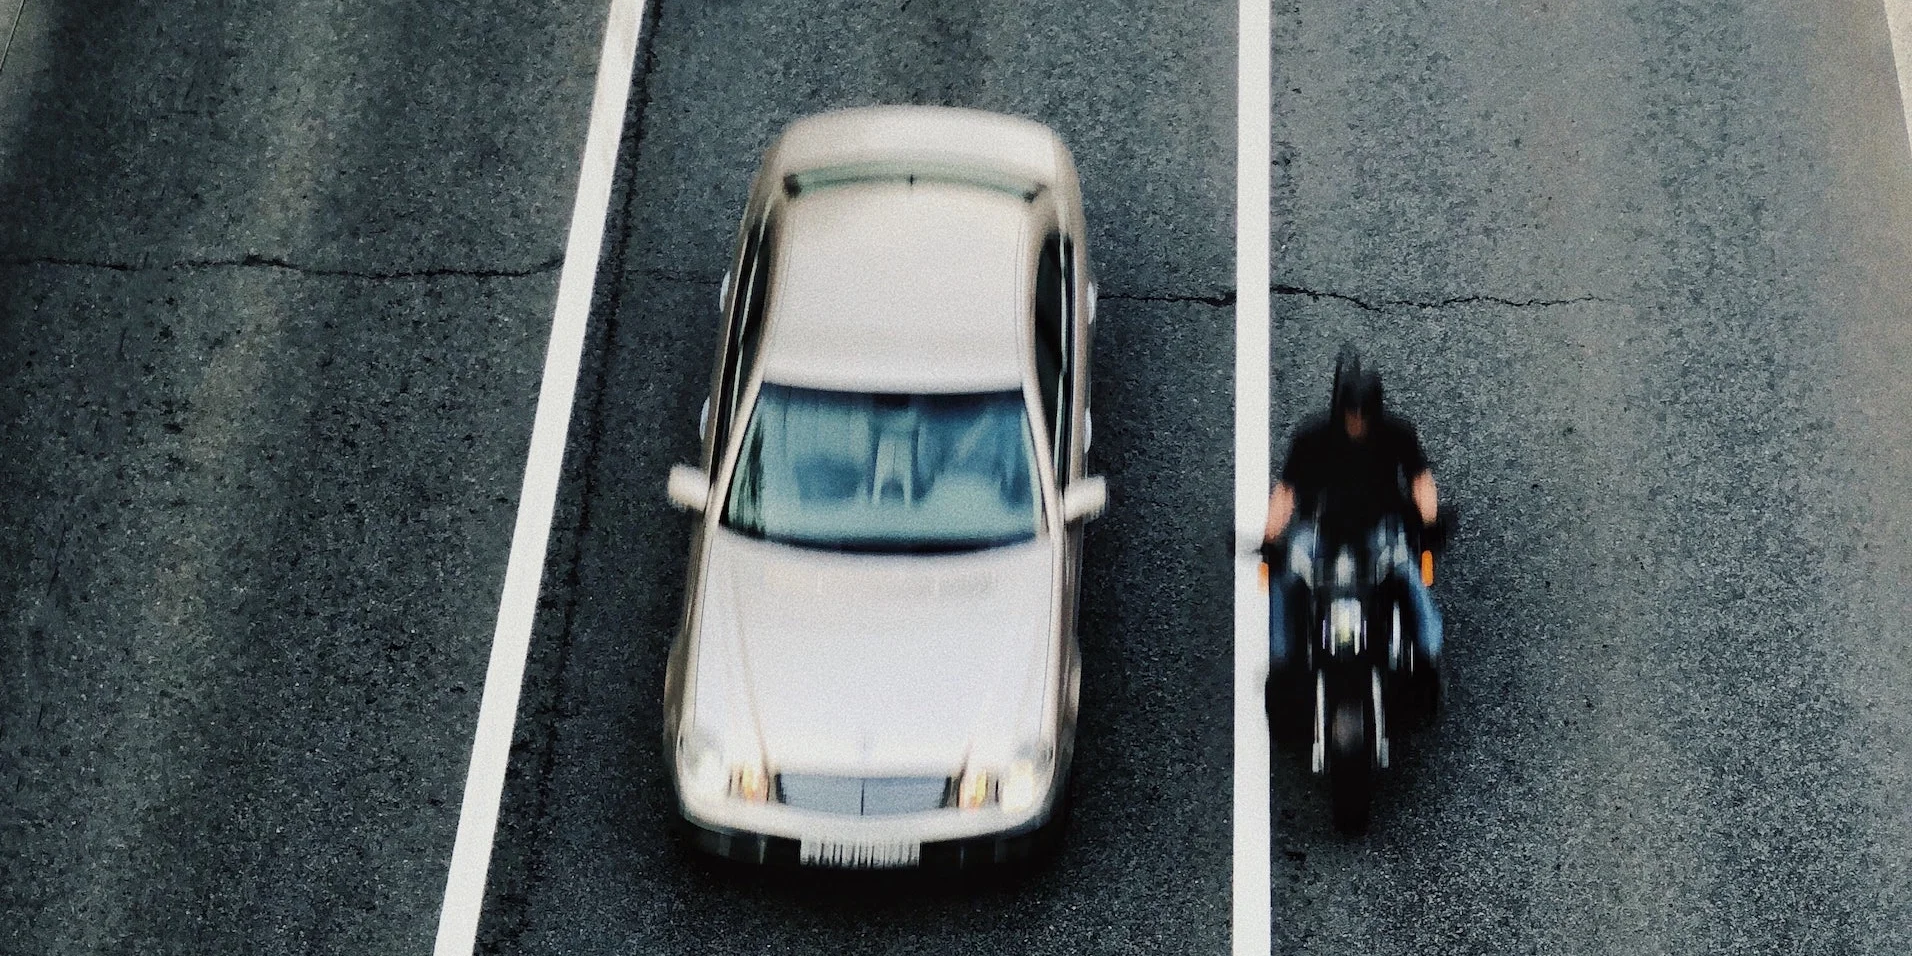 South Carolina law prohibits motorcyclists from “lane-splitting” or squeezing their bikes alongside other vehicles in the same lane. Yet the law allows “lane-sharing” with another motorcycle. Here’s what South Carolina motorists need to know.